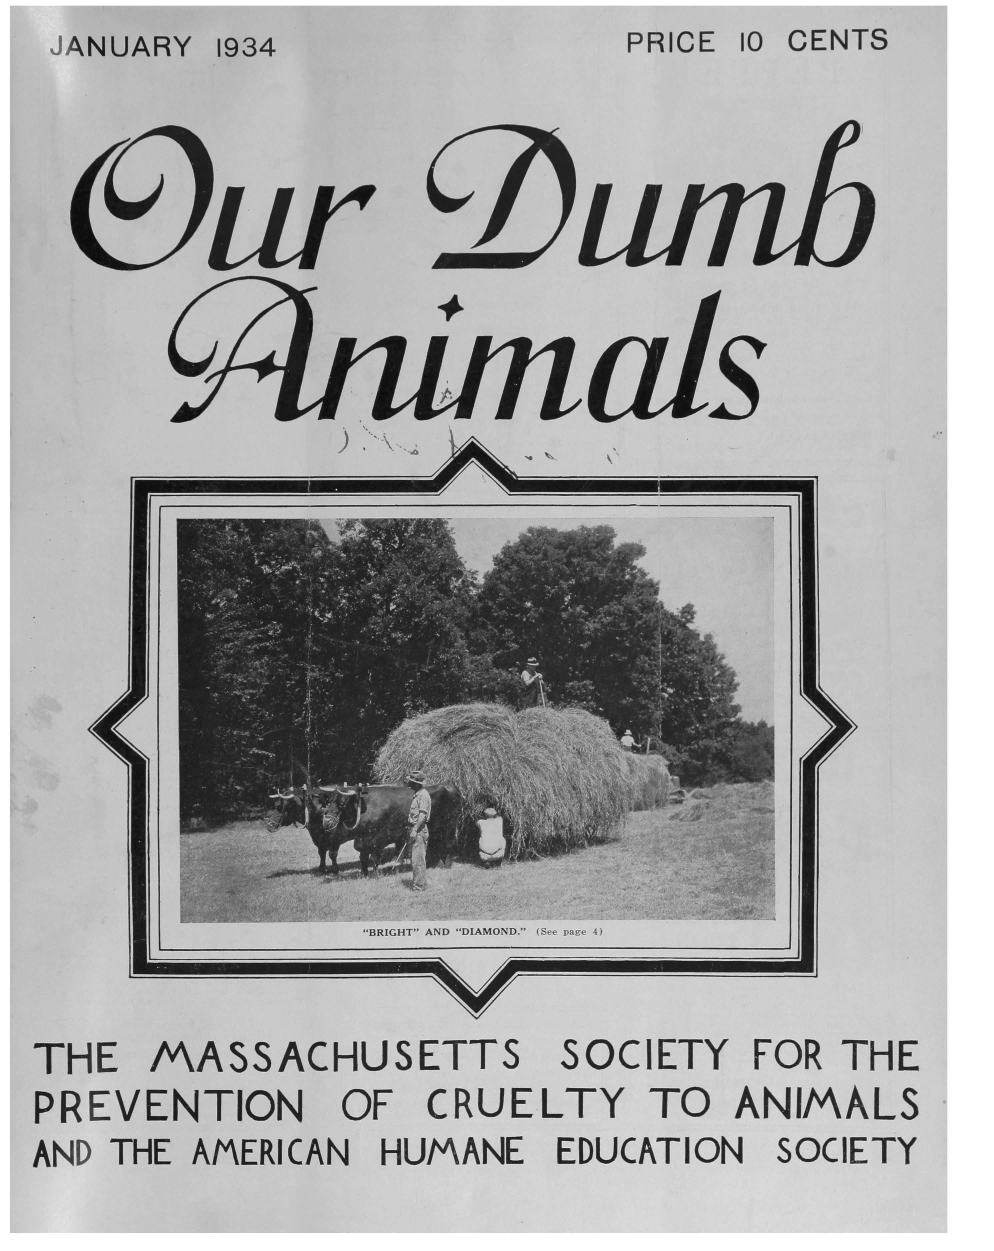 handle is hein.journals/animals67 and id is 1 raw text is: PRICE 10 CENTS)u+alSInTHE  MASSACHUSETTS SOCIETY FOR THEPREVENTION OF CRUELTY TO ANIMALSAND THE AMERICAN HUMANE EDUCATION SOCIETYBRIGHT AND DIAMOND. (See page 4)WJANUARY 1934uln